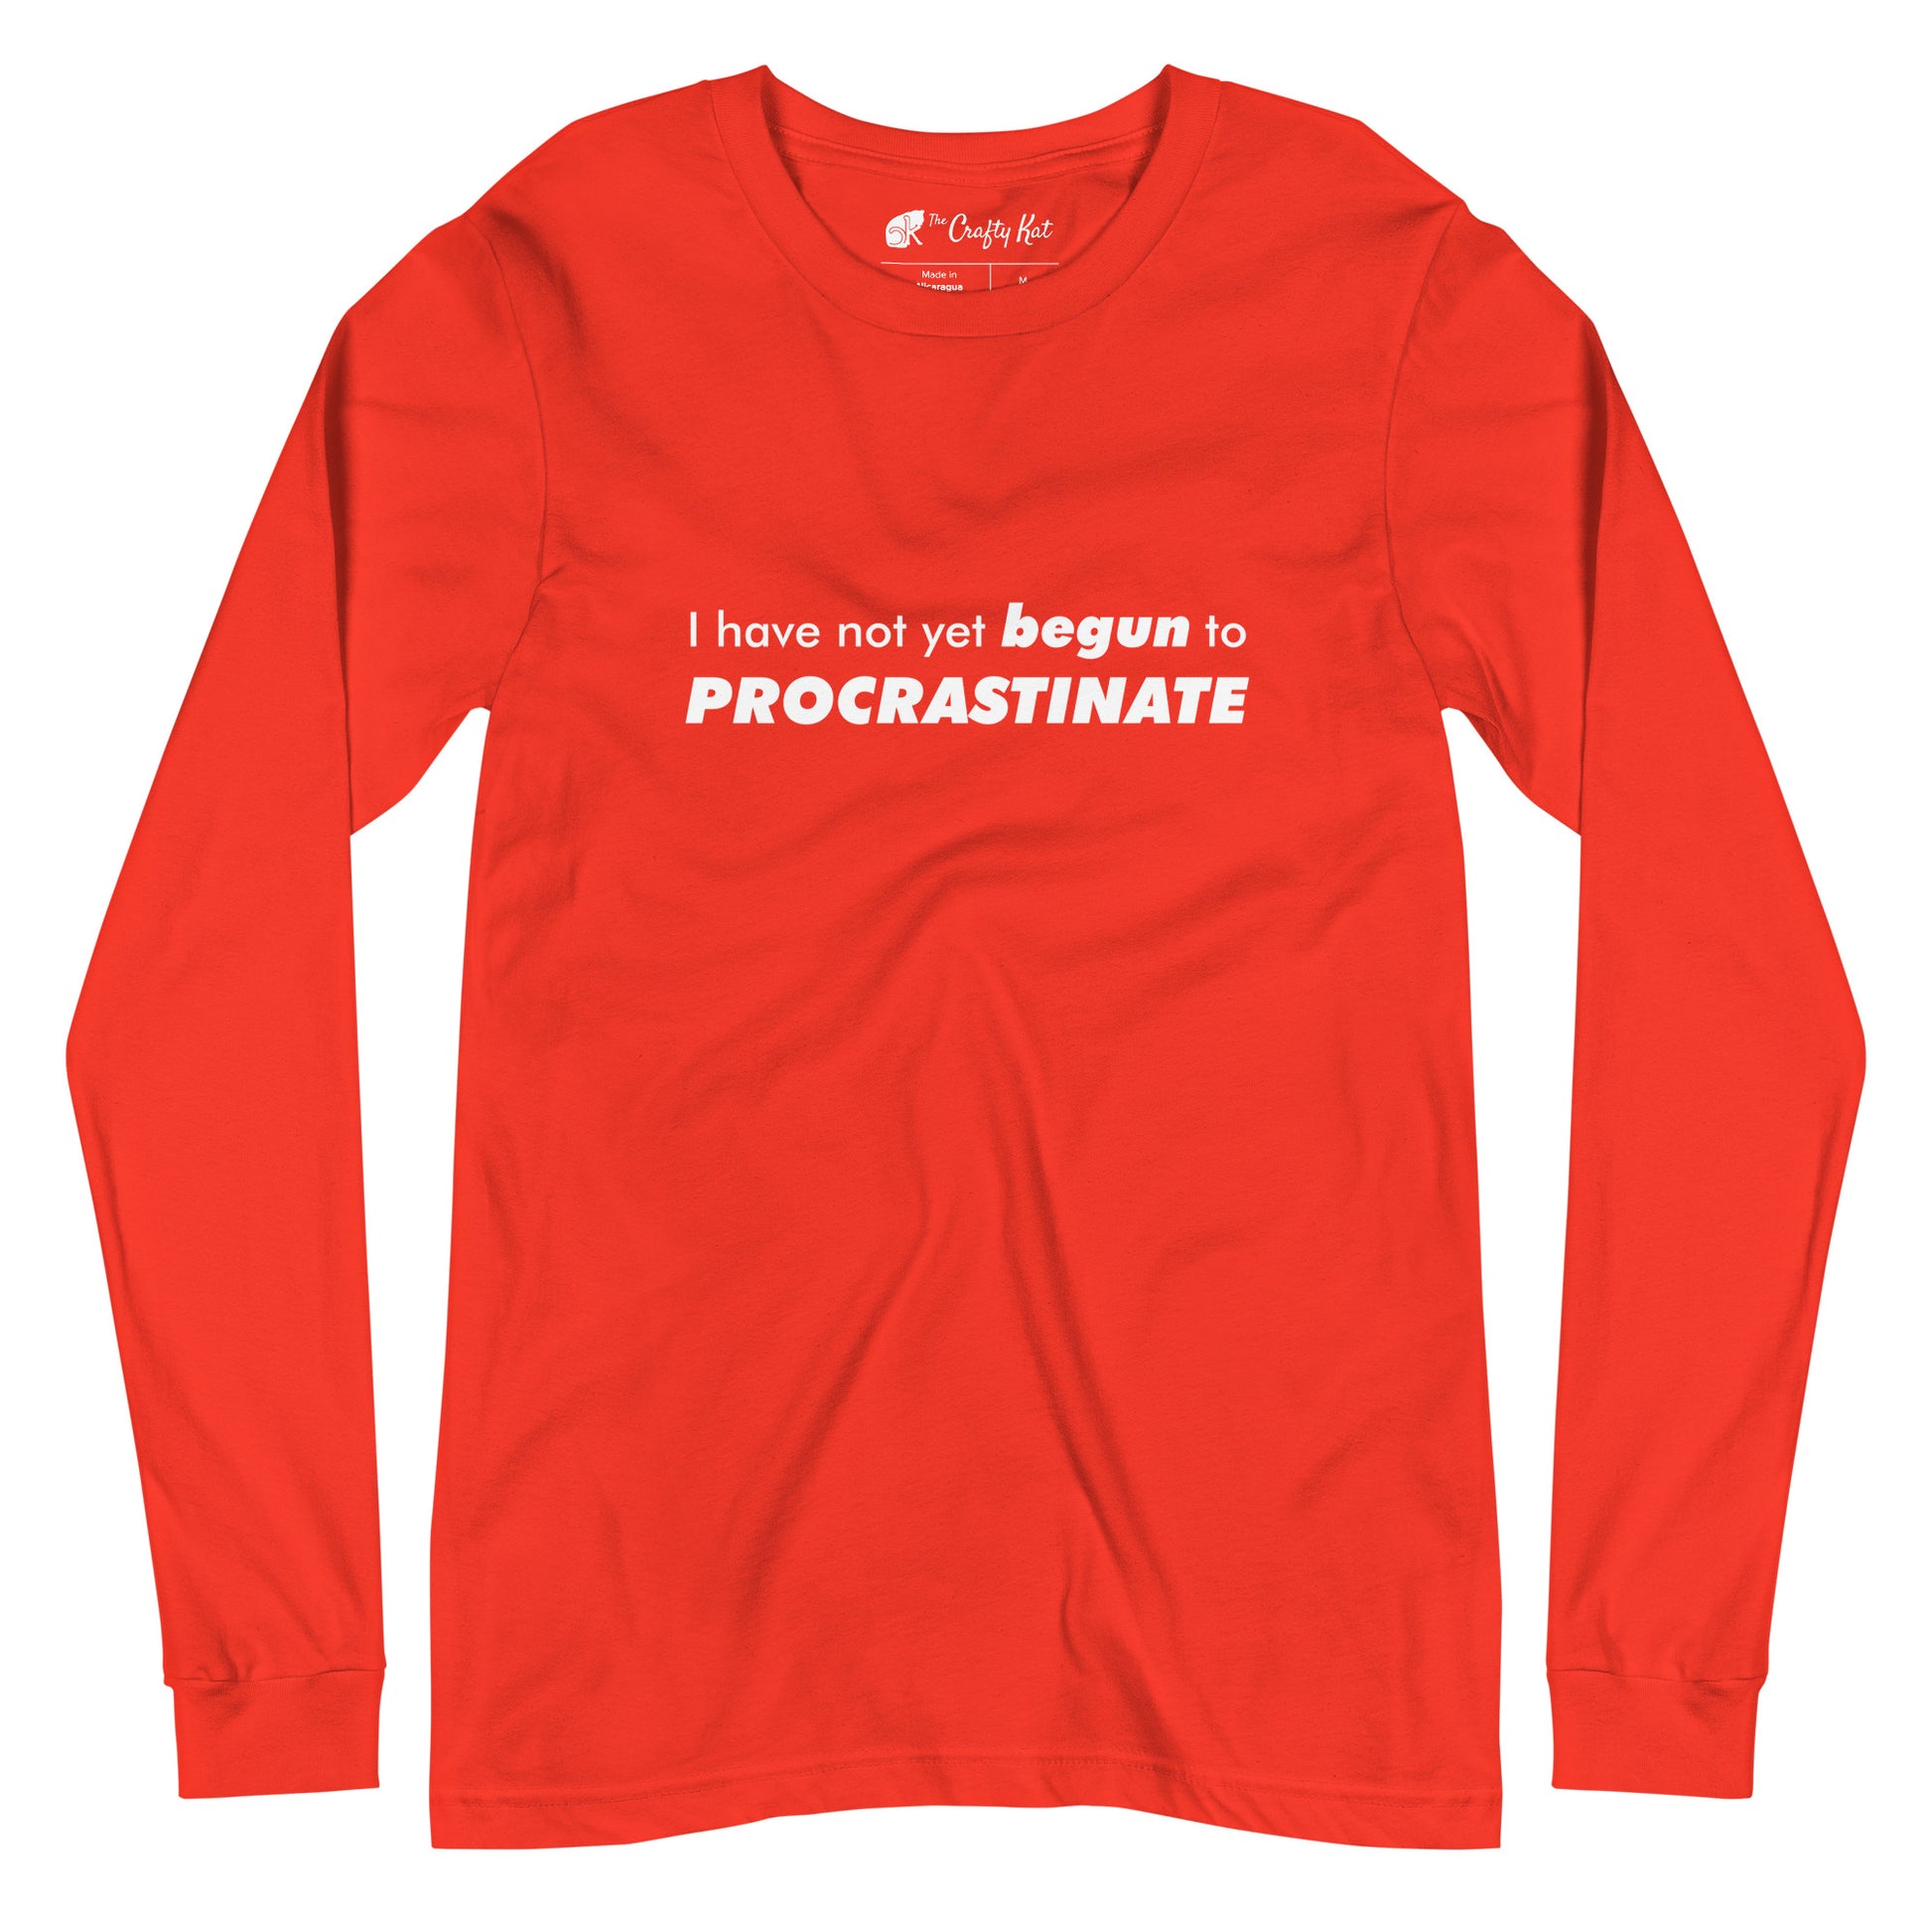 Poppy (bright red) long-sleeve shirt with text graphic: "I have not yet BEGUN to PROCRASTINATE"